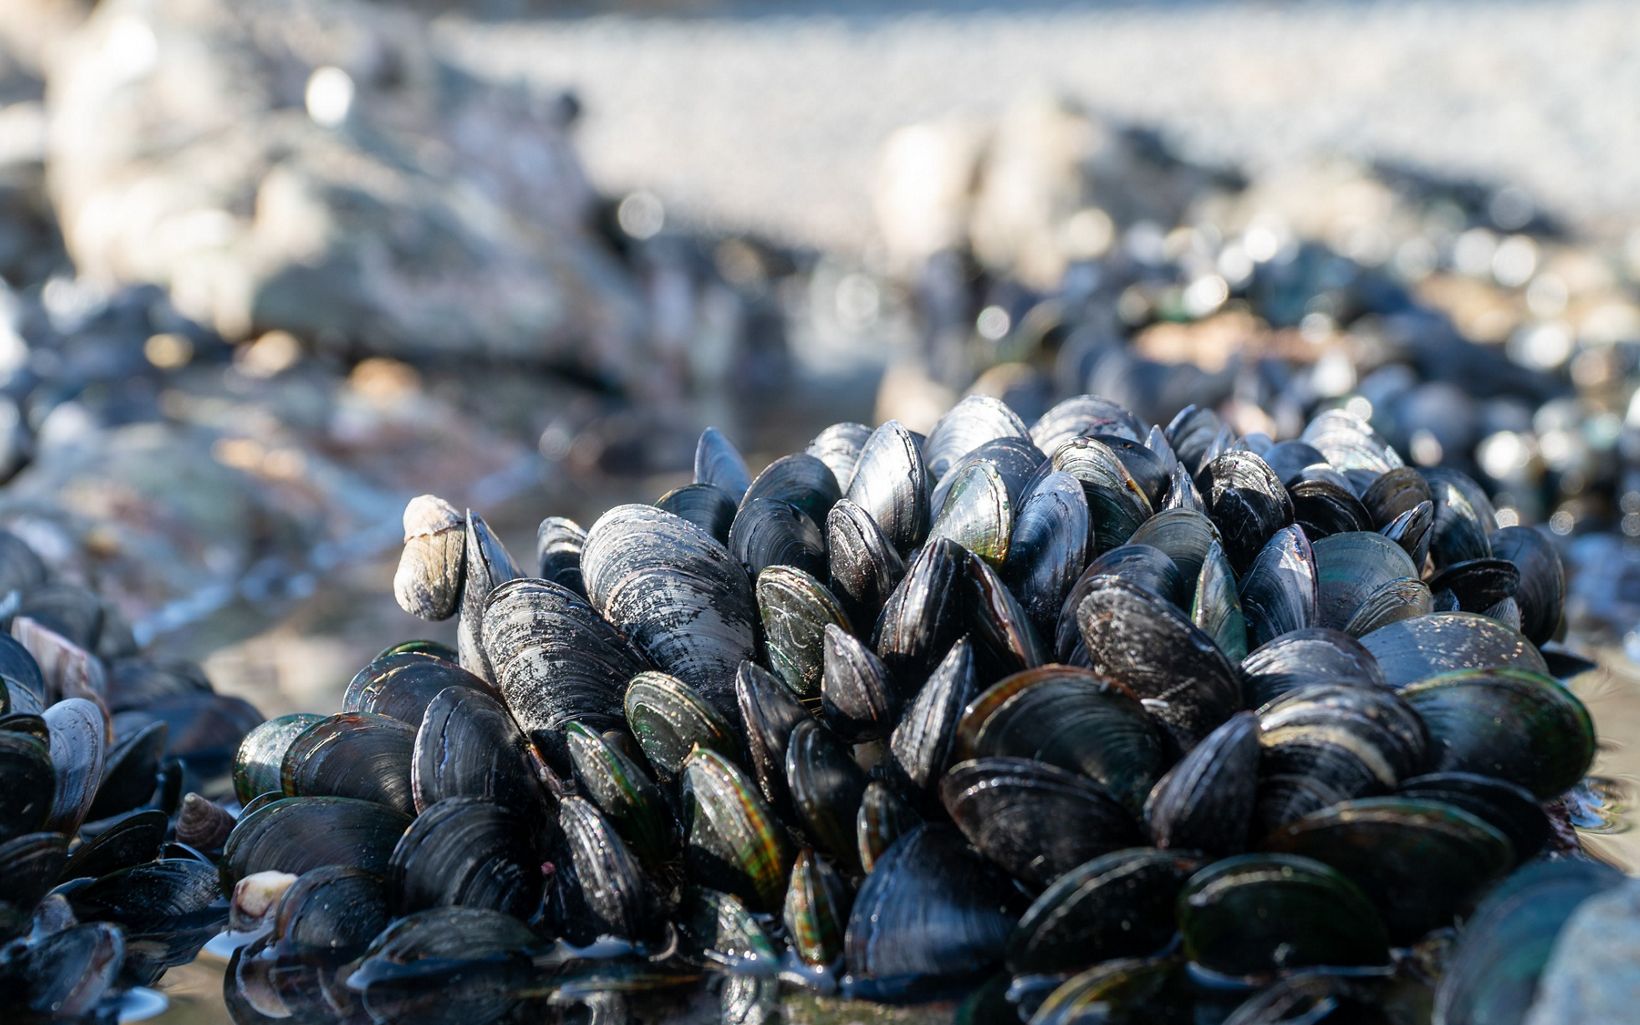 Hope for the Future Beds like these may hold the keys to understanding how to bring back the rest of the Hauraki Gulf's native mussel population. © Ethan Kearns/The Nature Conservancy